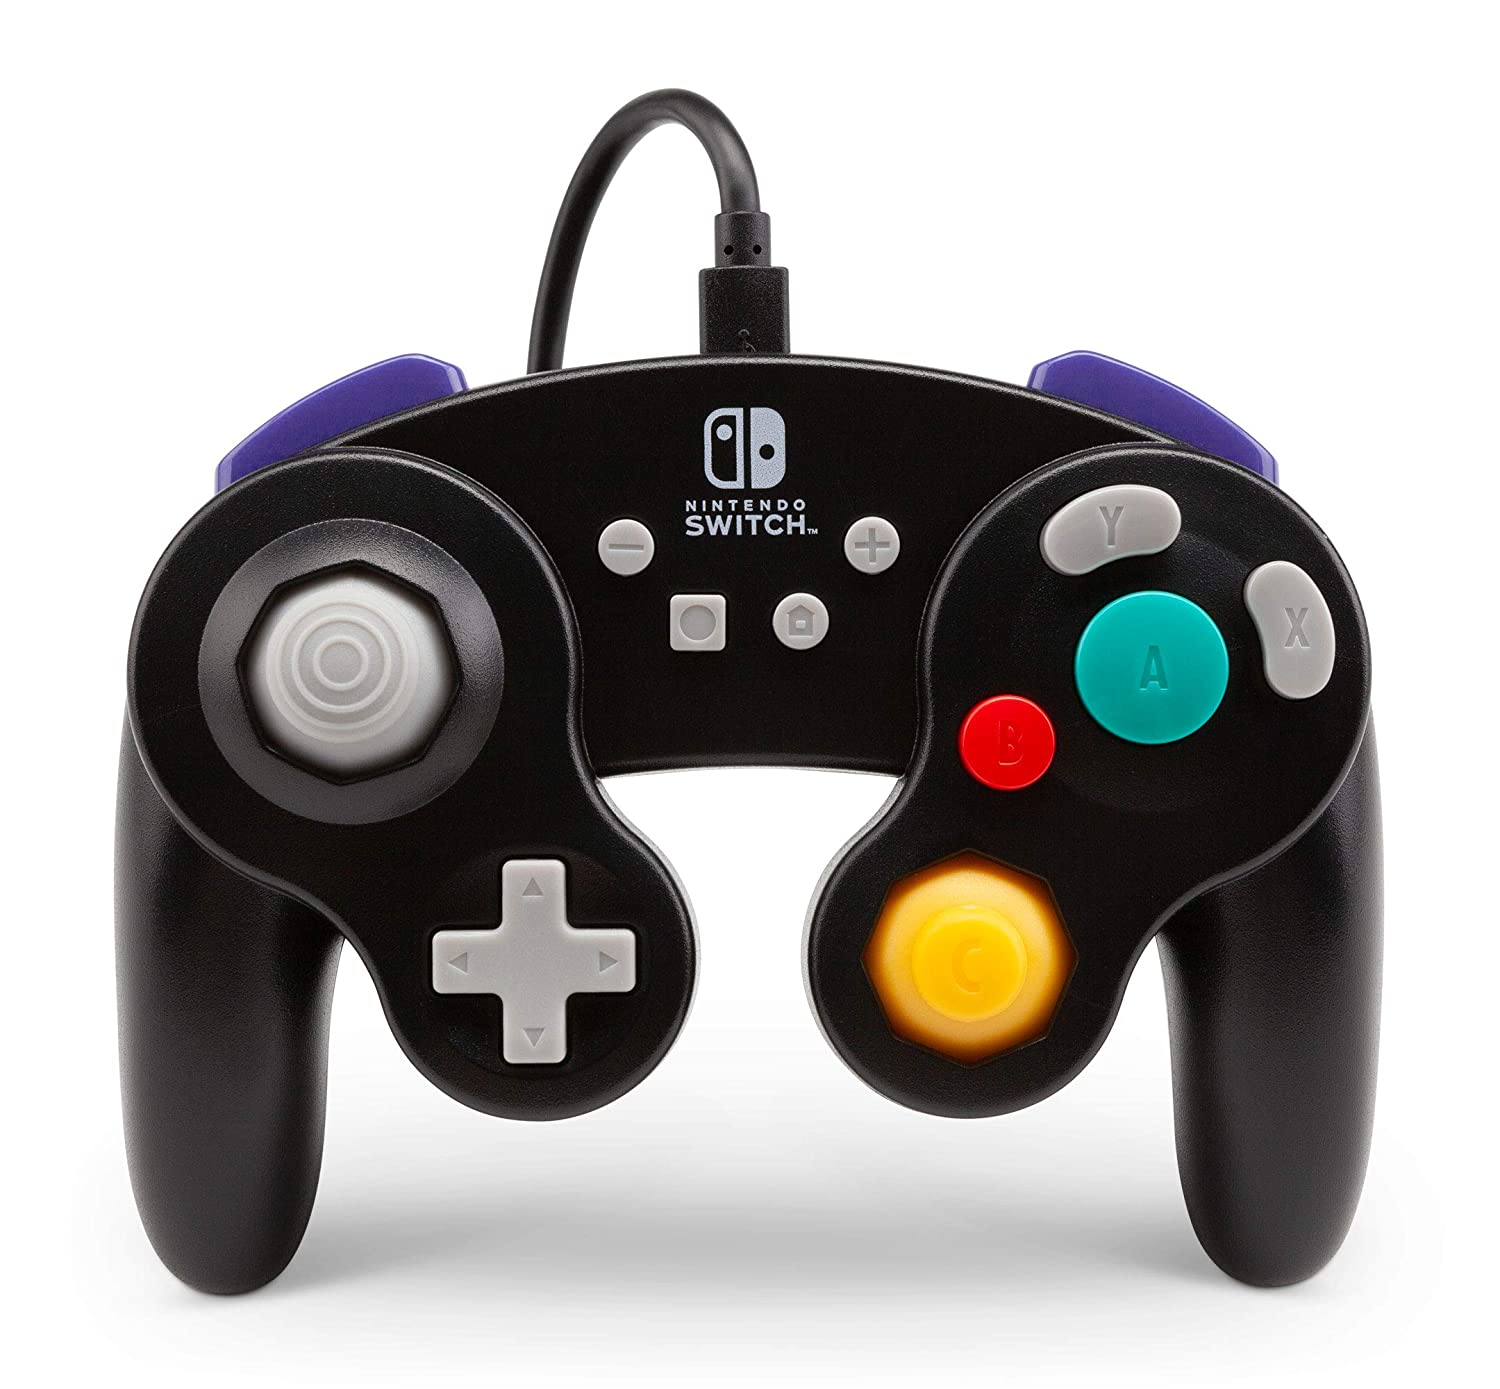 GameCube Controller for Nintendo Switch by PowerA.